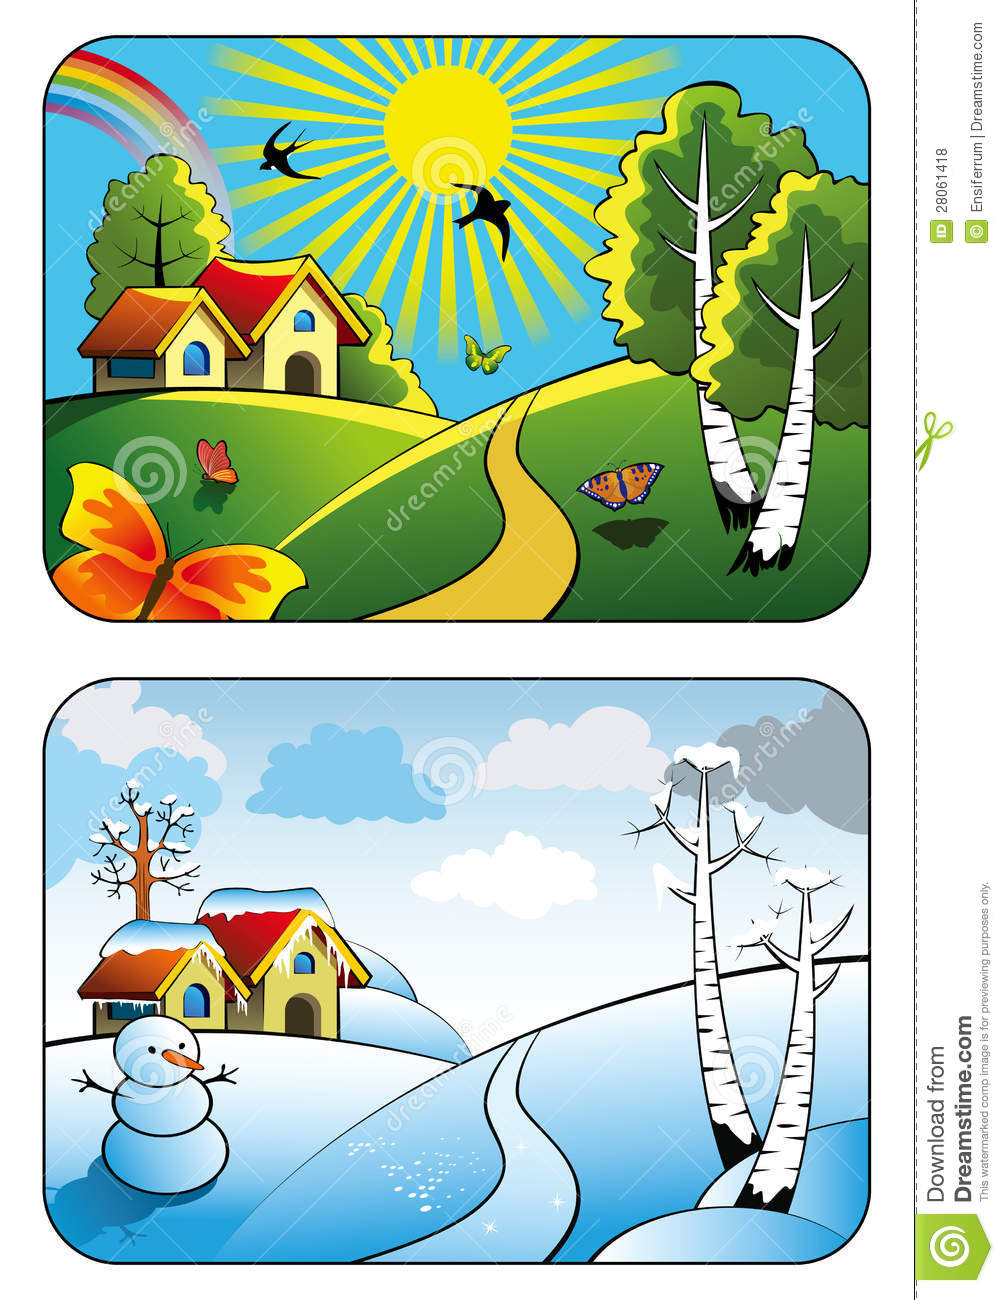 Winter And Summer Landscape Royalty Free Stock Photos   Image